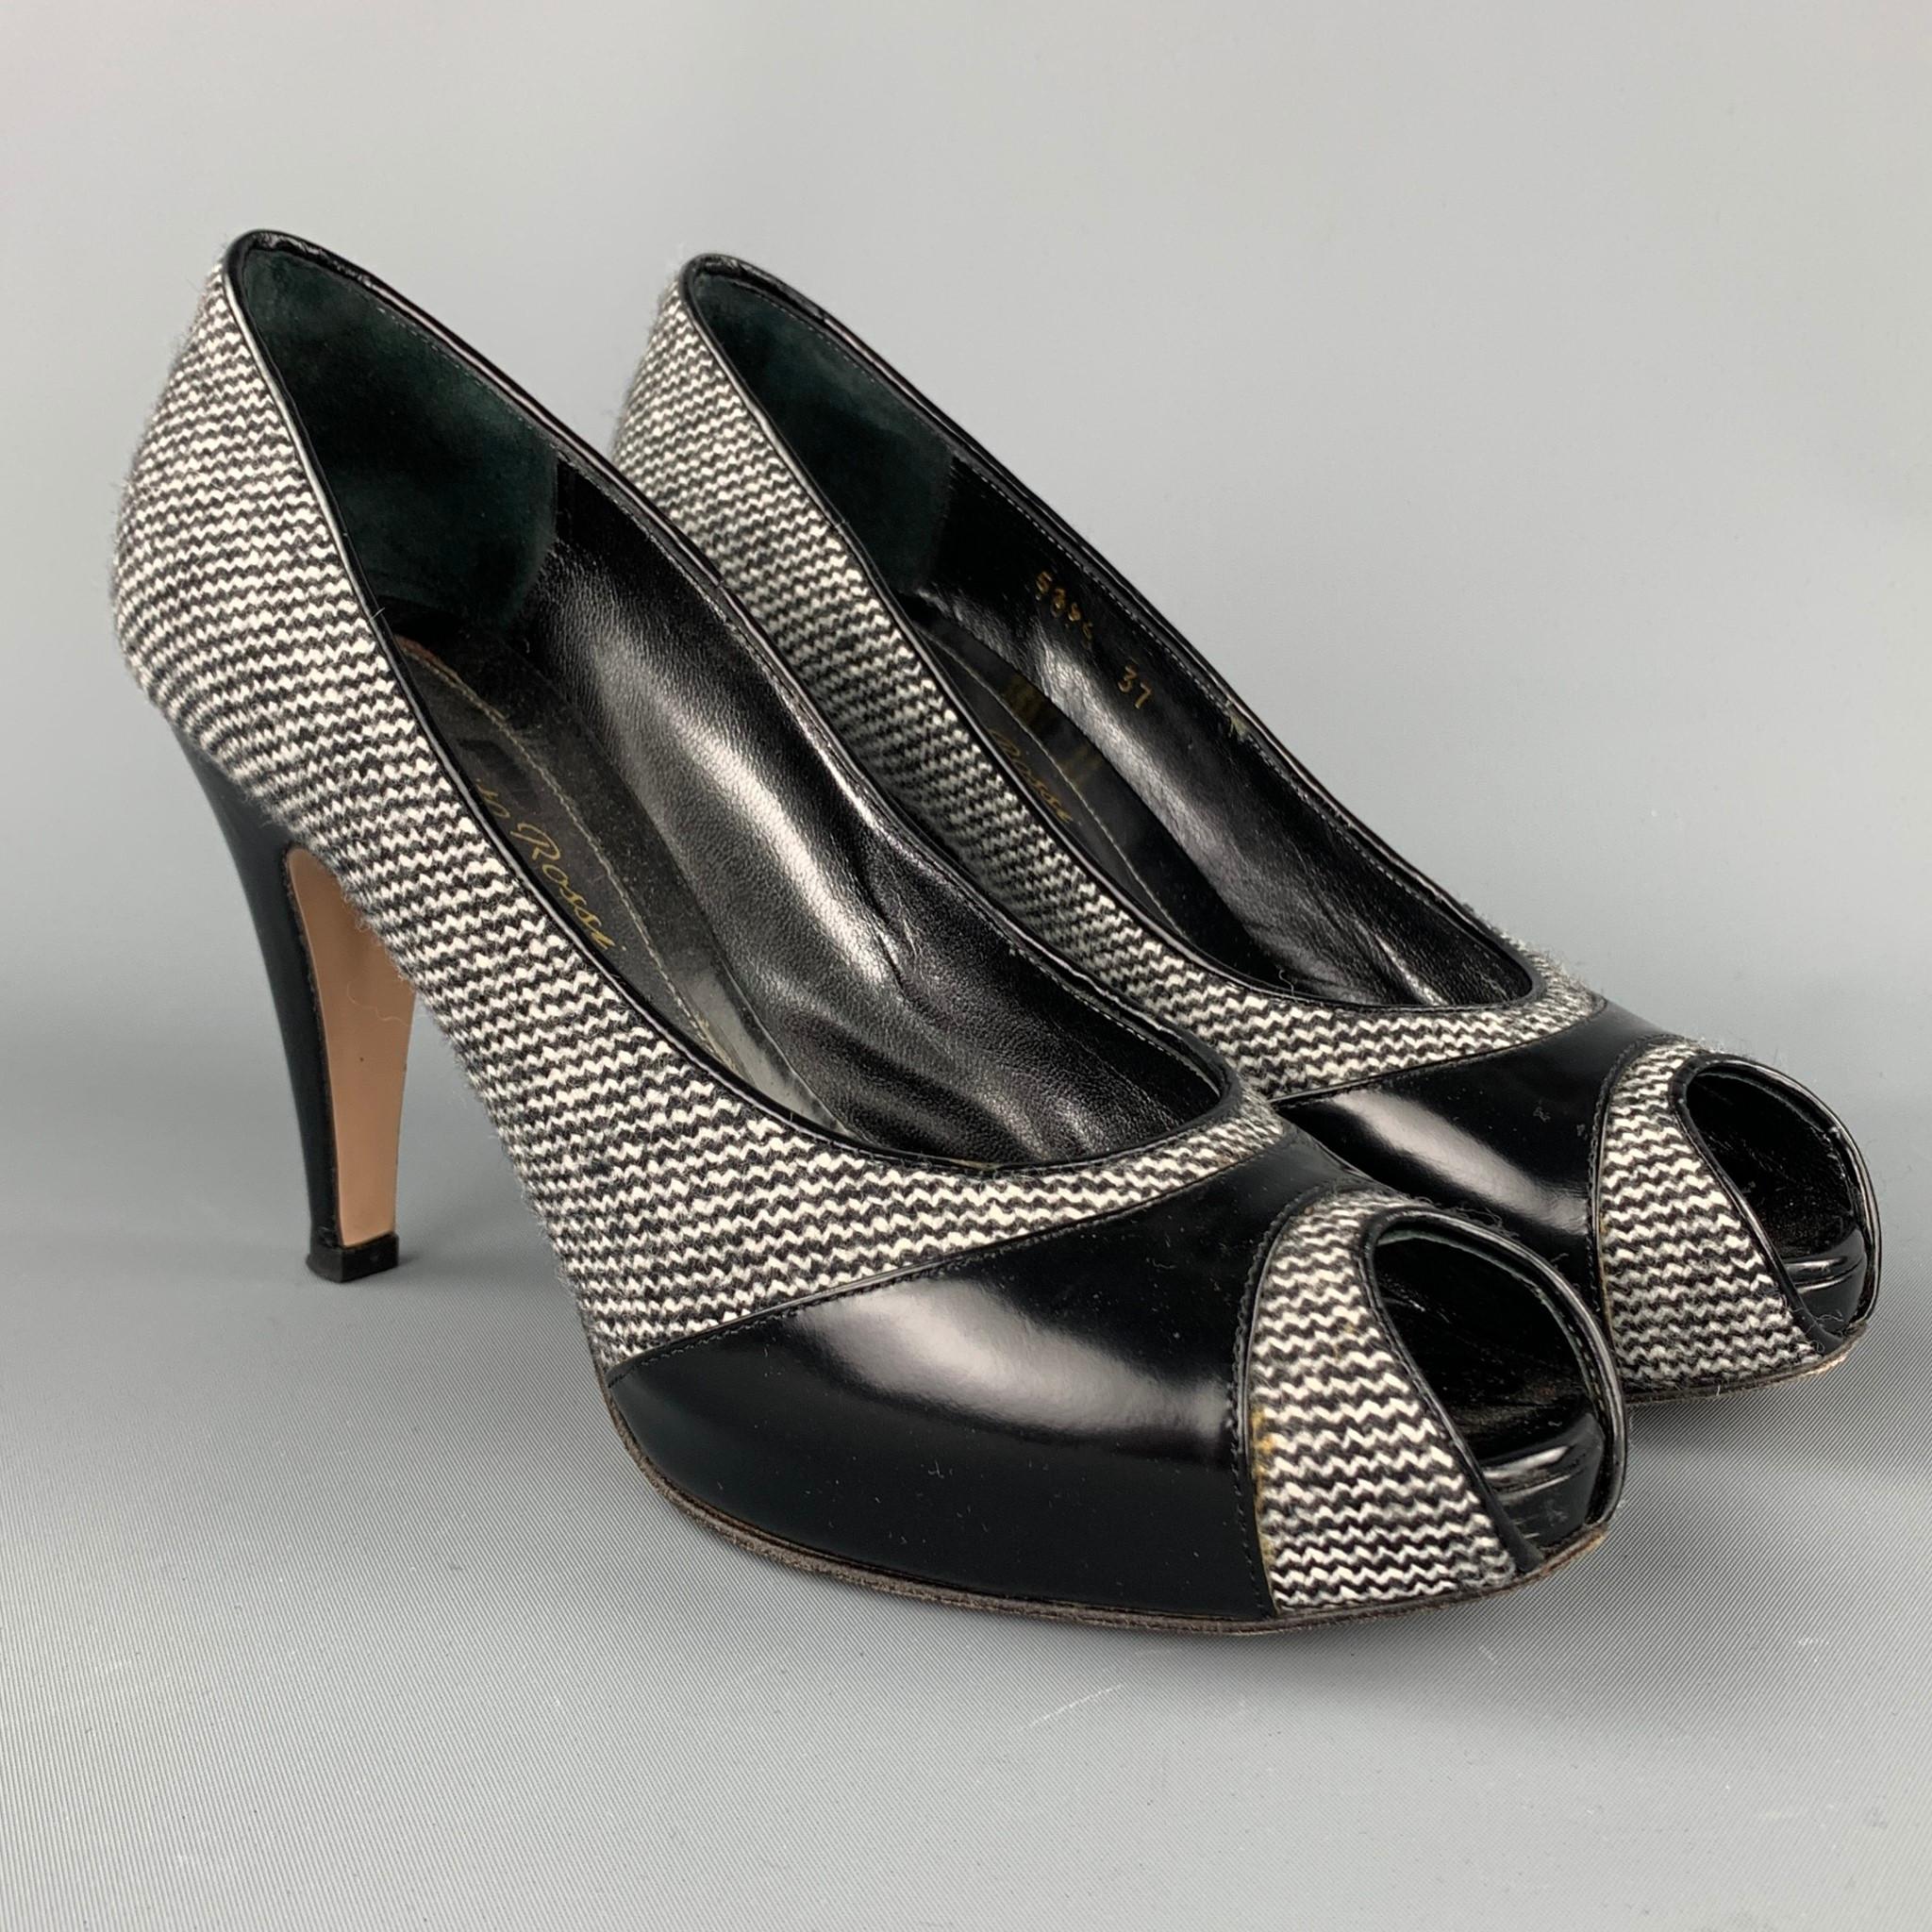 GIANVITO ROSSI pumps comes in a grey tweed with a black patent leather trim featuring a open toe style and a wooden heel. Made in Italy.

Very Good Pre-Owned Condition.
Marked: EU 37

Measurements:

Heel: 4 in.